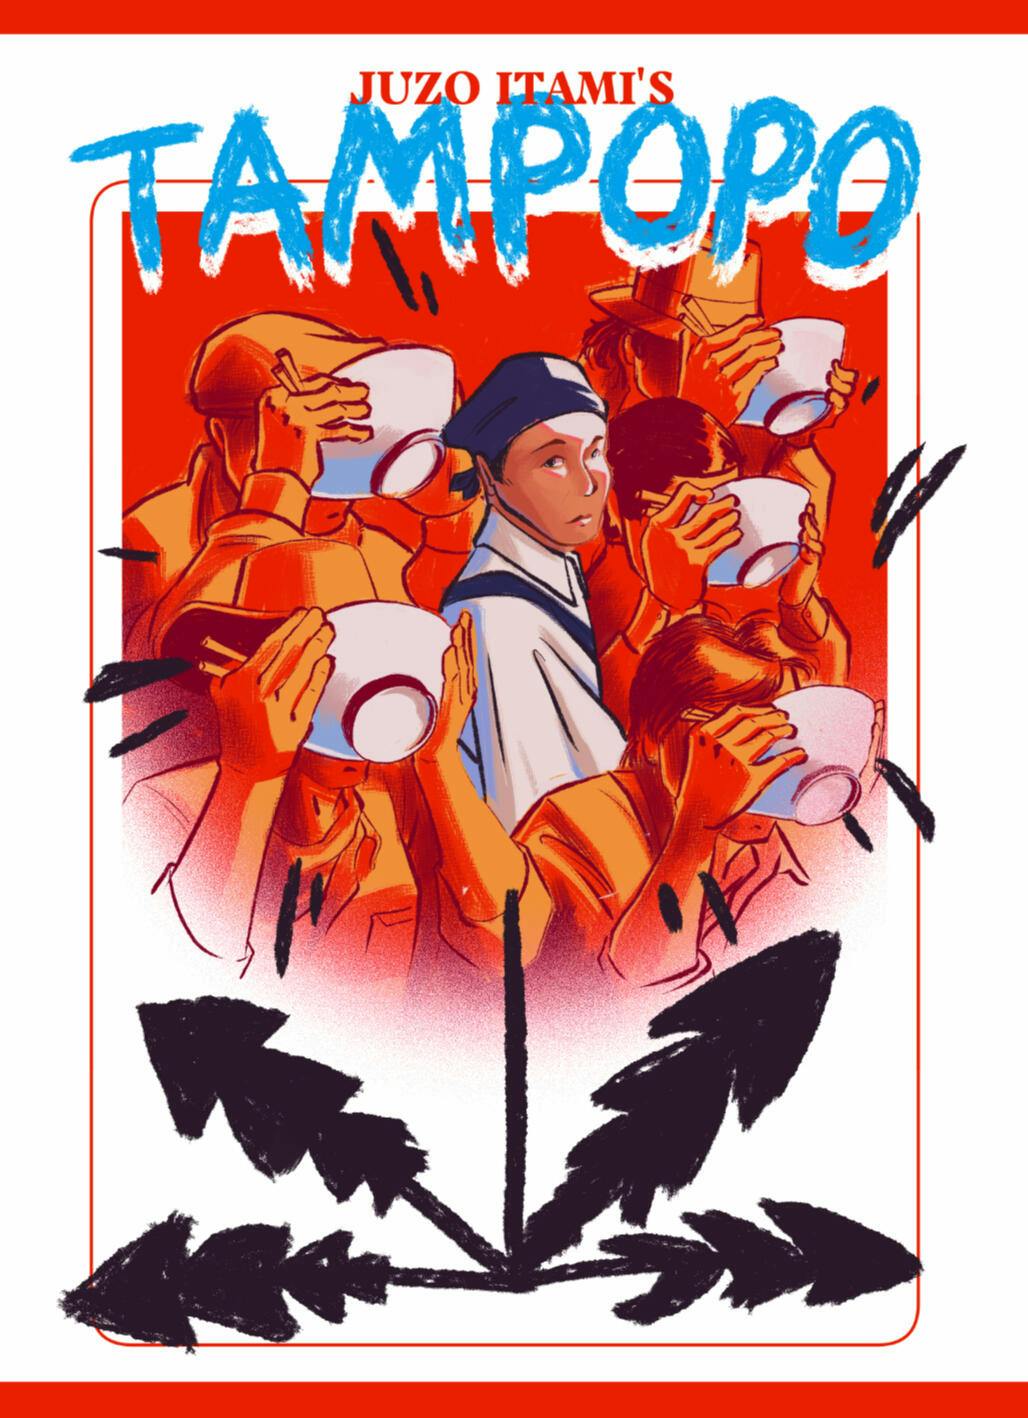 Illustrated poster for Juzo Itami's Tampopo, featuring five people slurping bowls of ramen and one character staring at the viewer, drawn by Cholo Cabarroguis